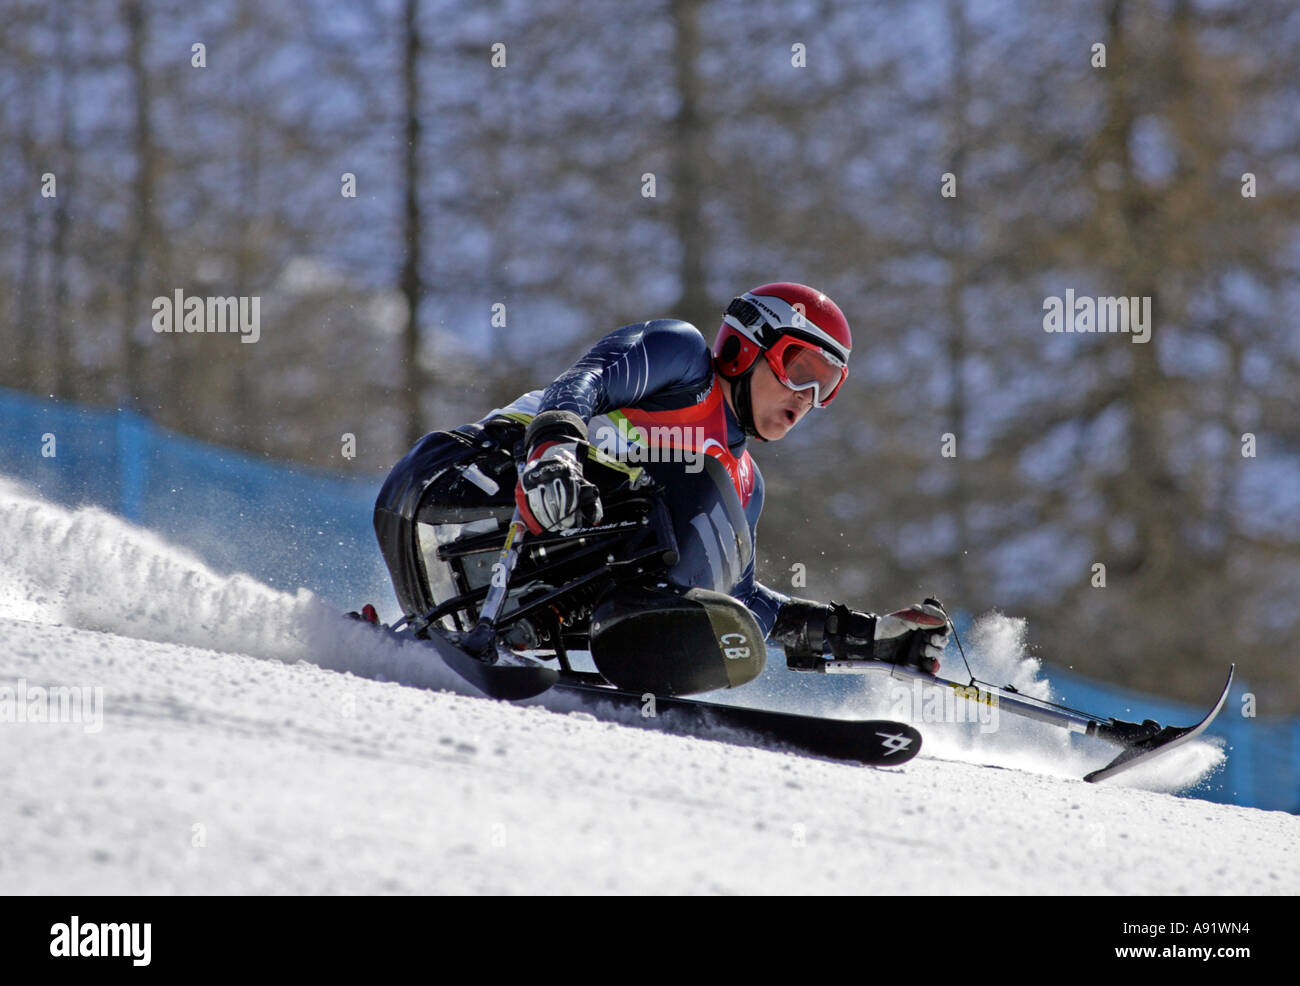 Carl Burnett LW11 of the USA in the Mens Alpine Skiing Super G Sitting competition Stock Photo